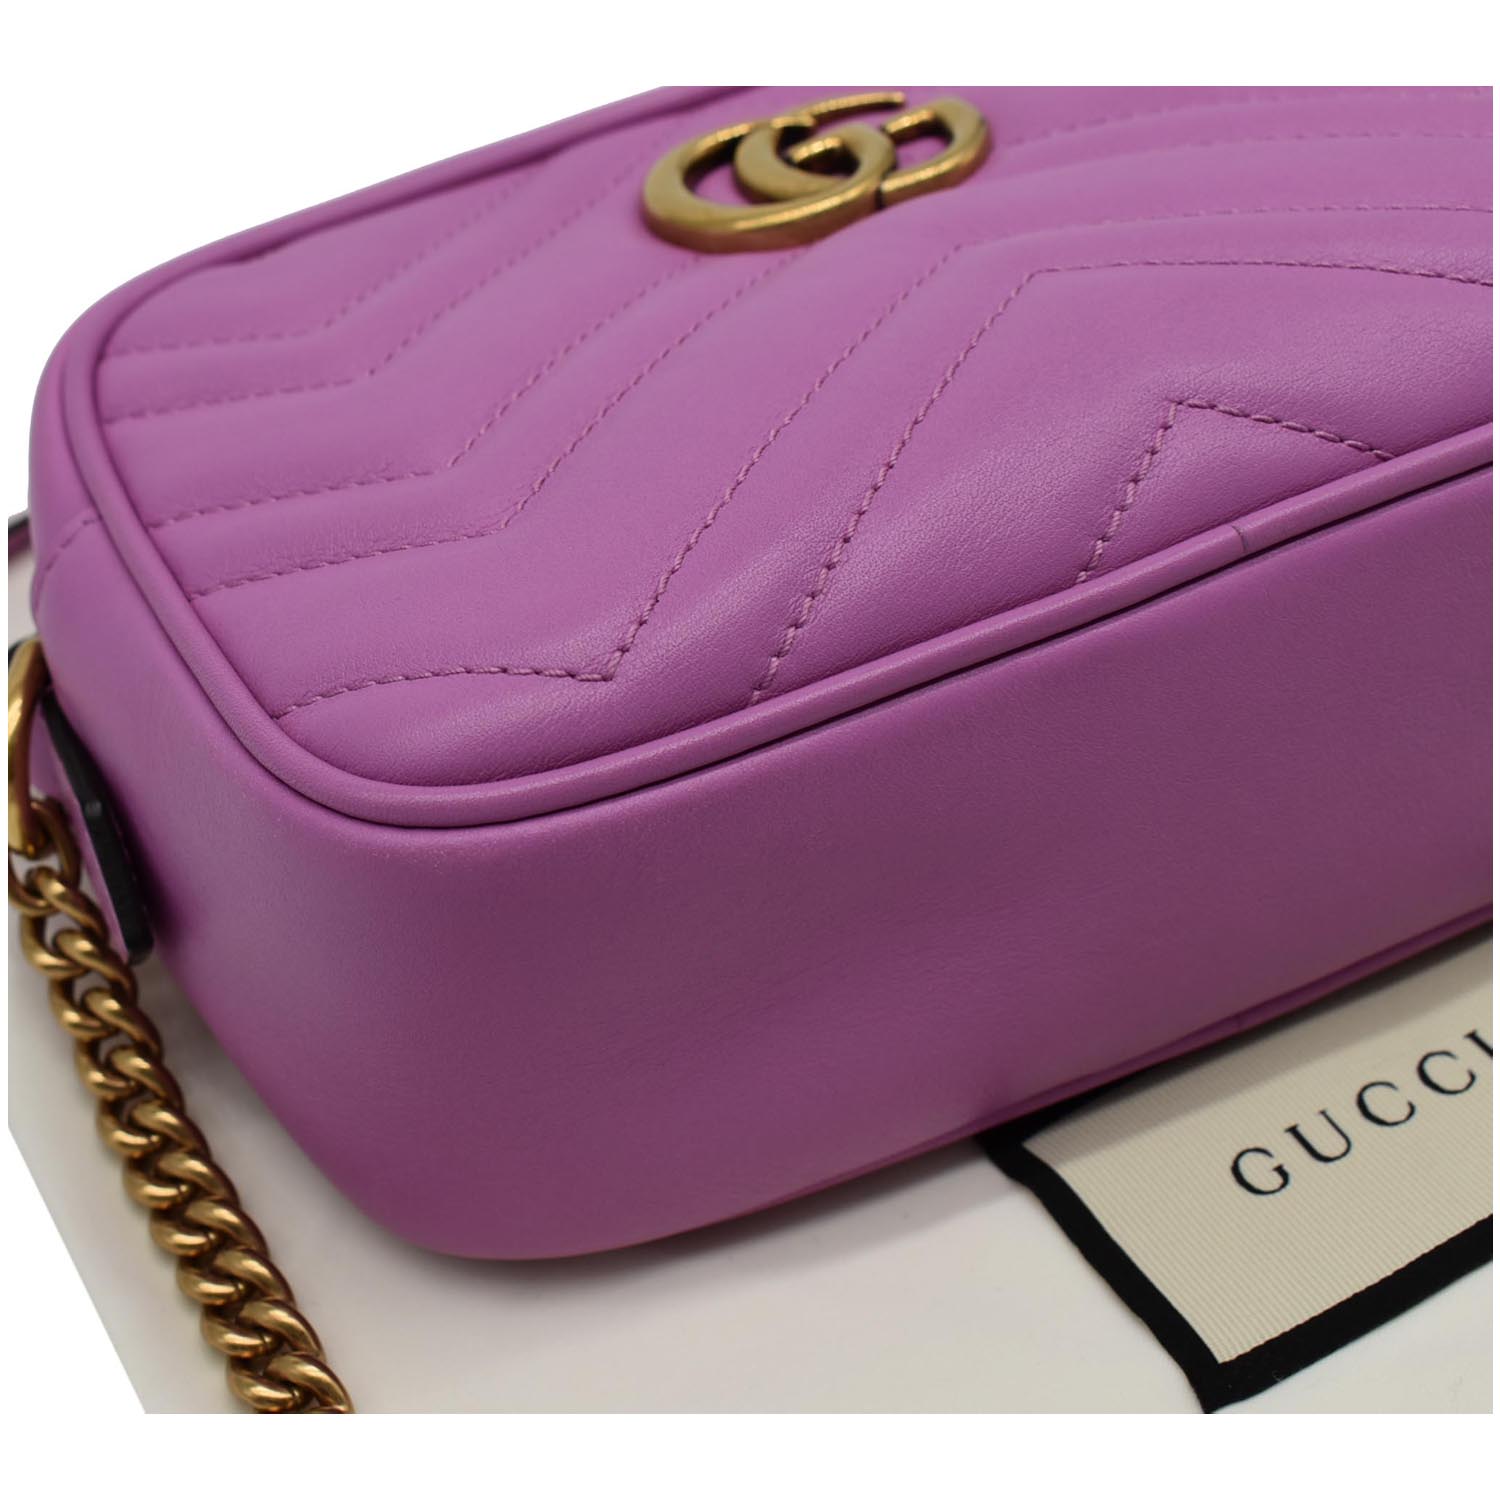 Gg marmont flap leather crossbody bag Gucci Purple in Leather - 31752246